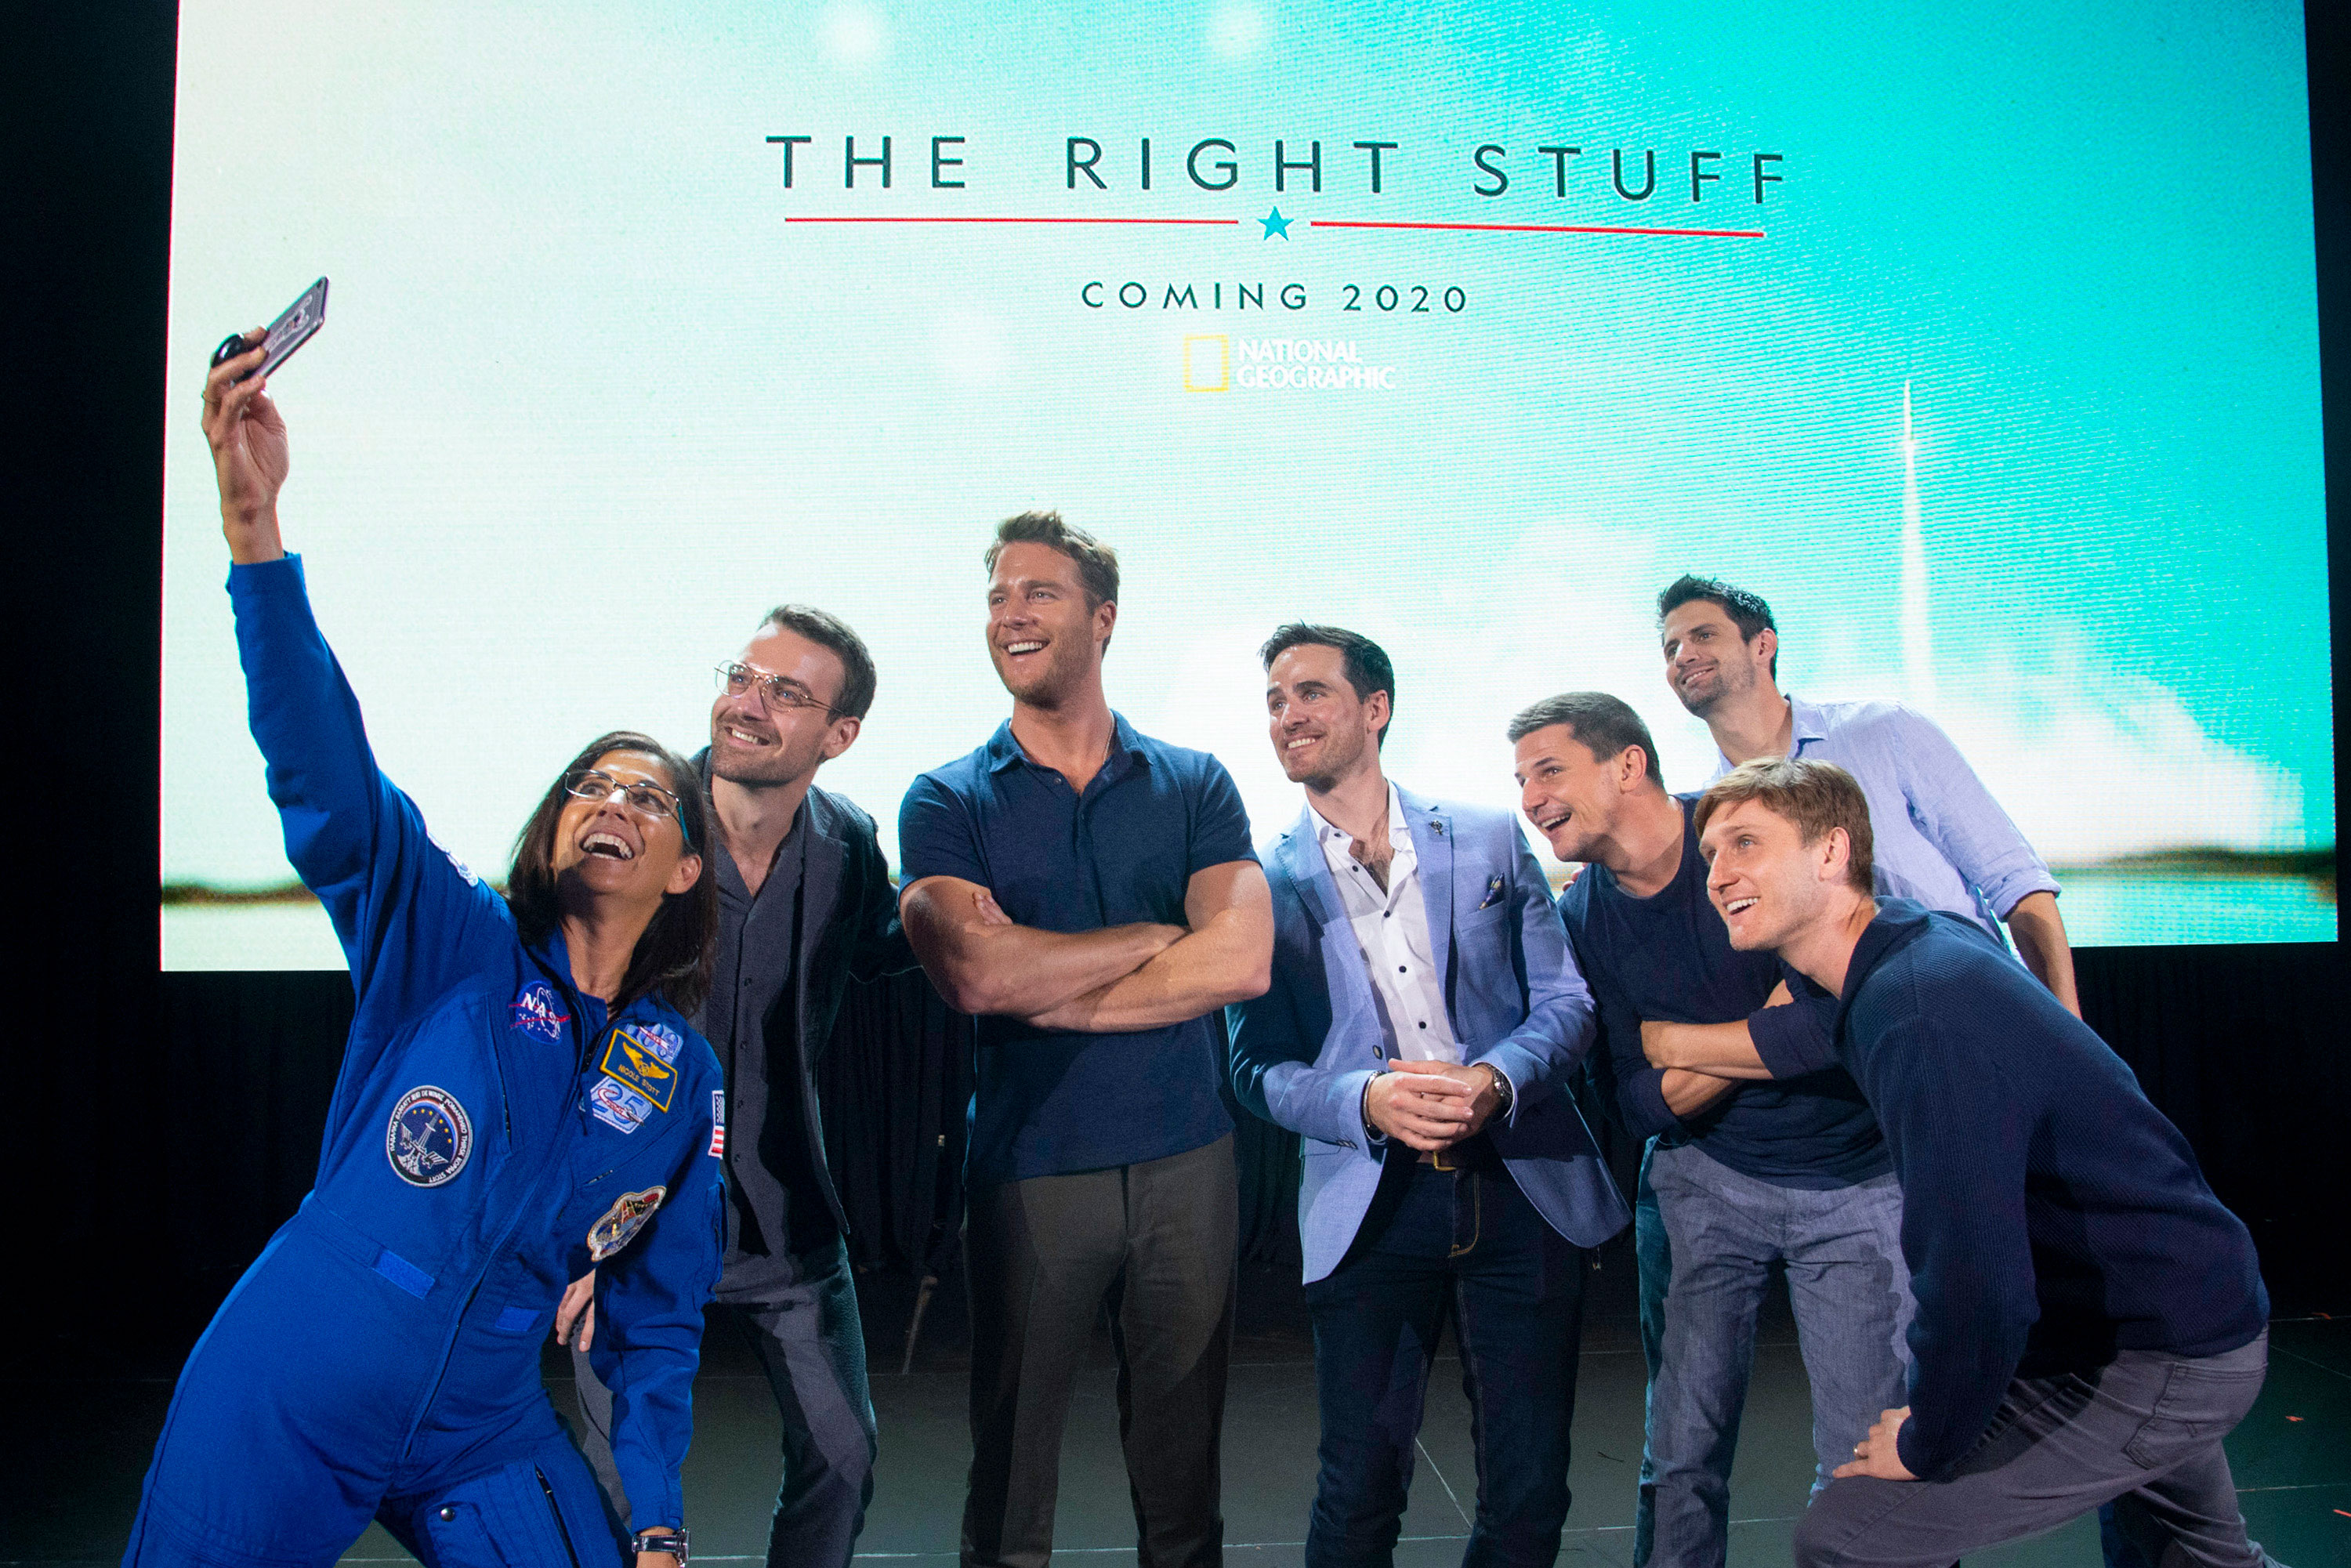 The Right Stuff' lifts off on Disney+, takes flight from book, film